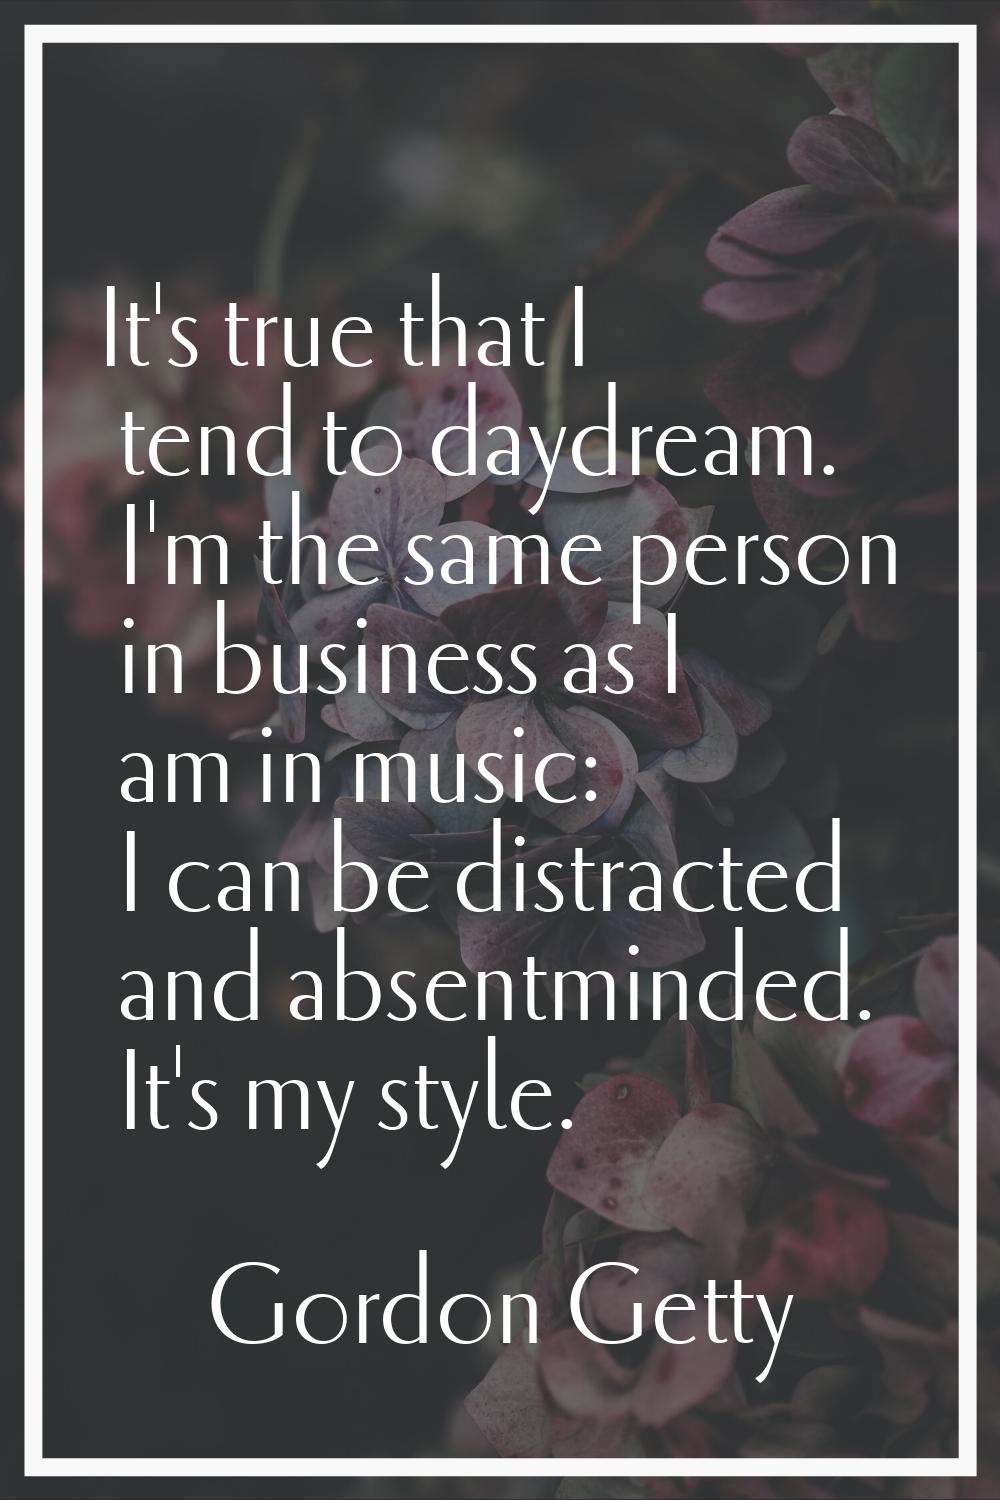 It's true that I tend to daydream. I'm the same person in business as I am in music: I can be distr